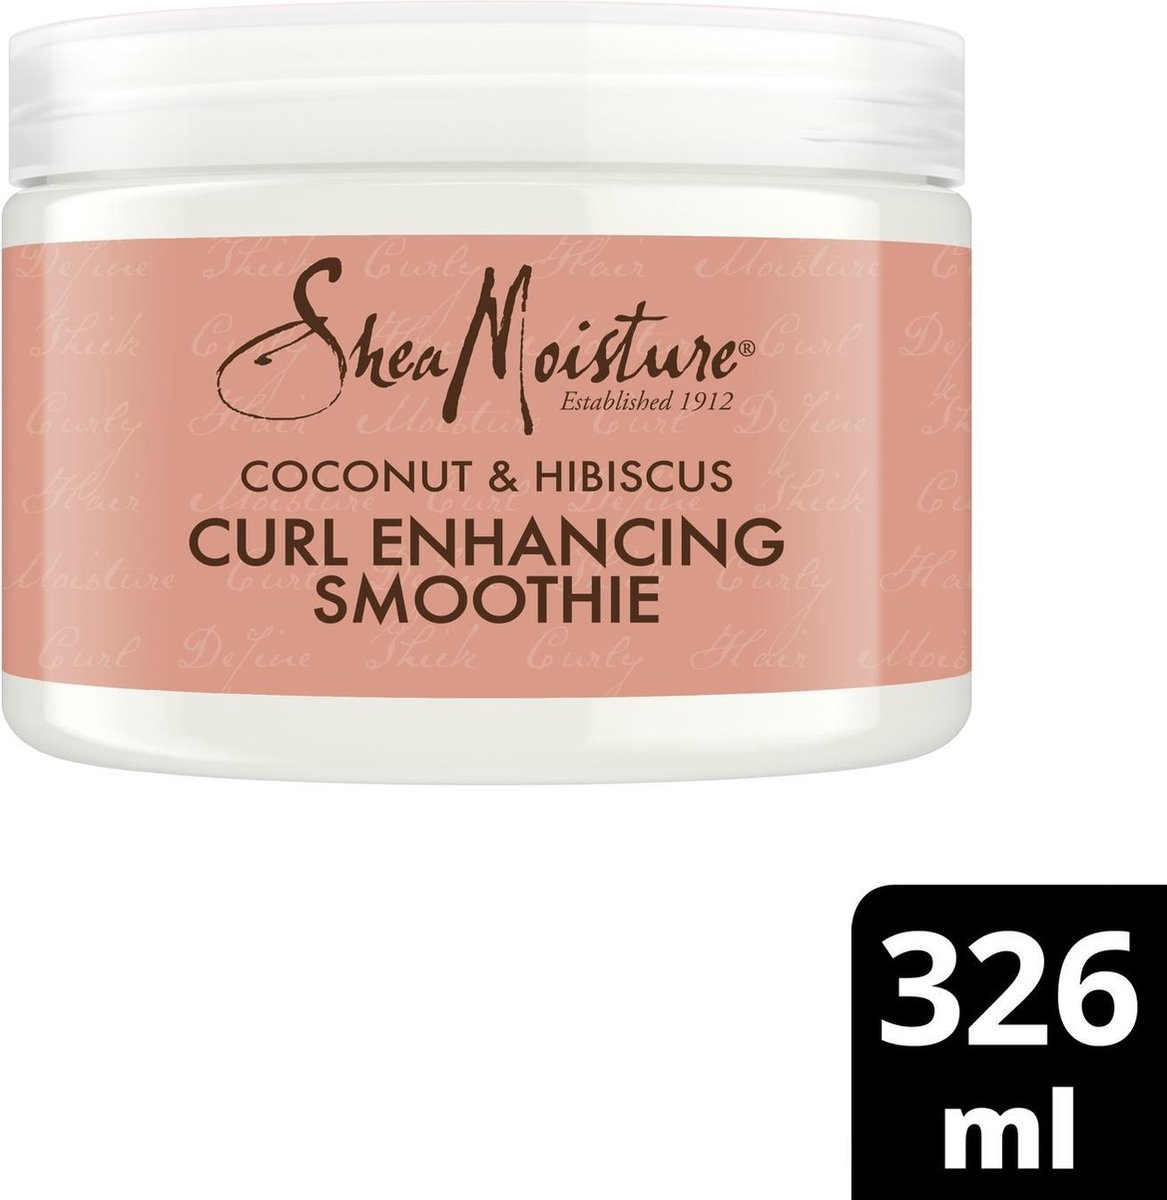 SheaMoisture Coconut & Hibiscus Curl Enhancing Smoothie - 326ml